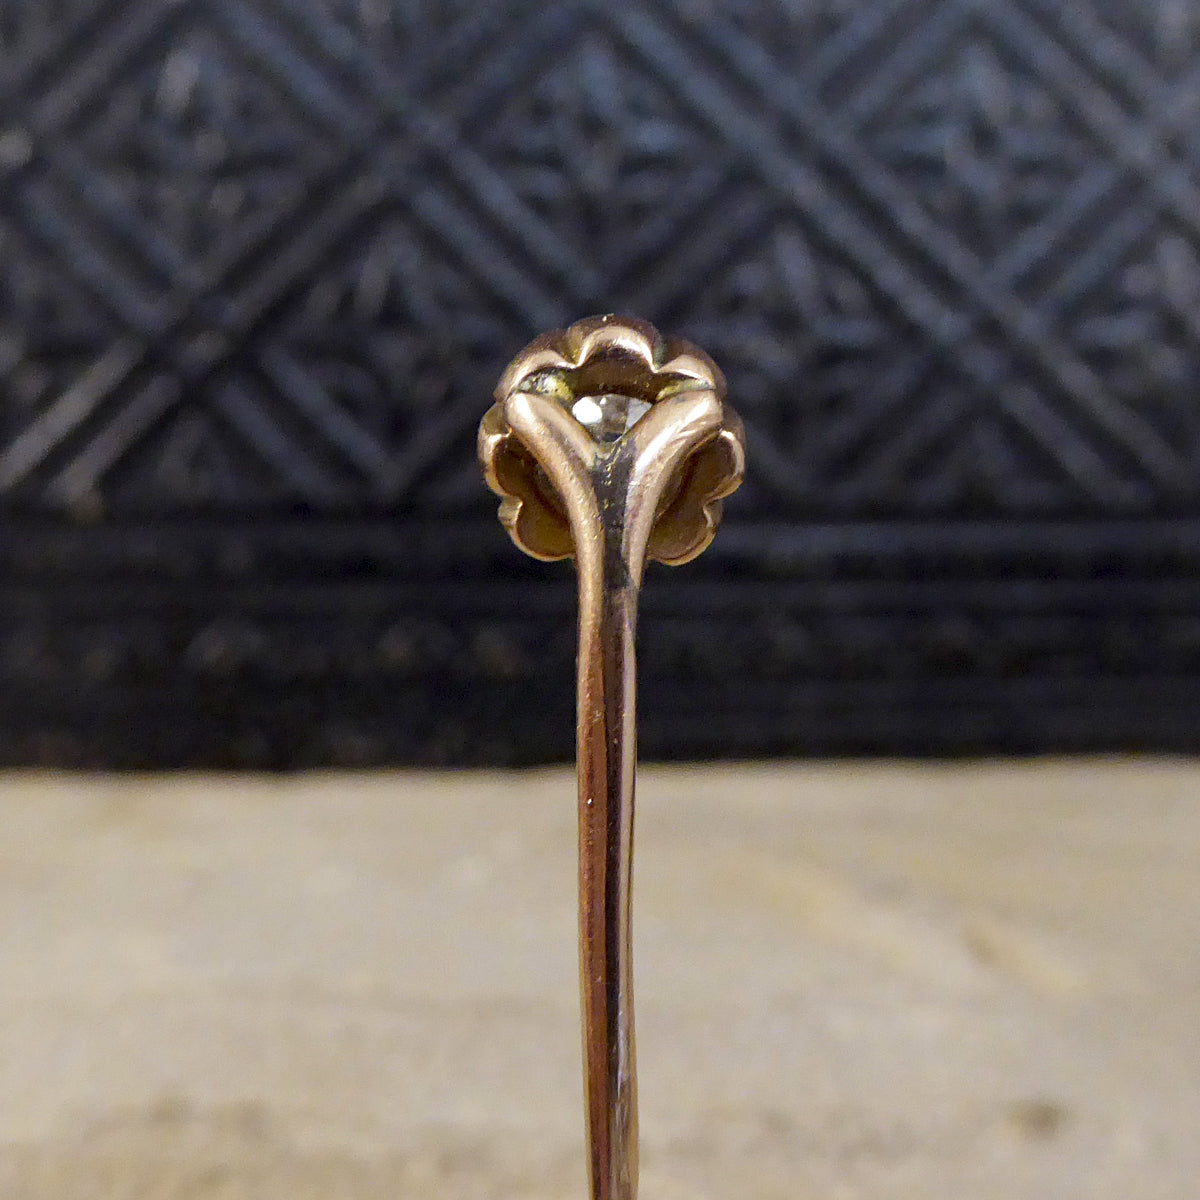 Antique Victorian 0.41ct Diamond Claw Set Pin in 9ct Yellow Gold